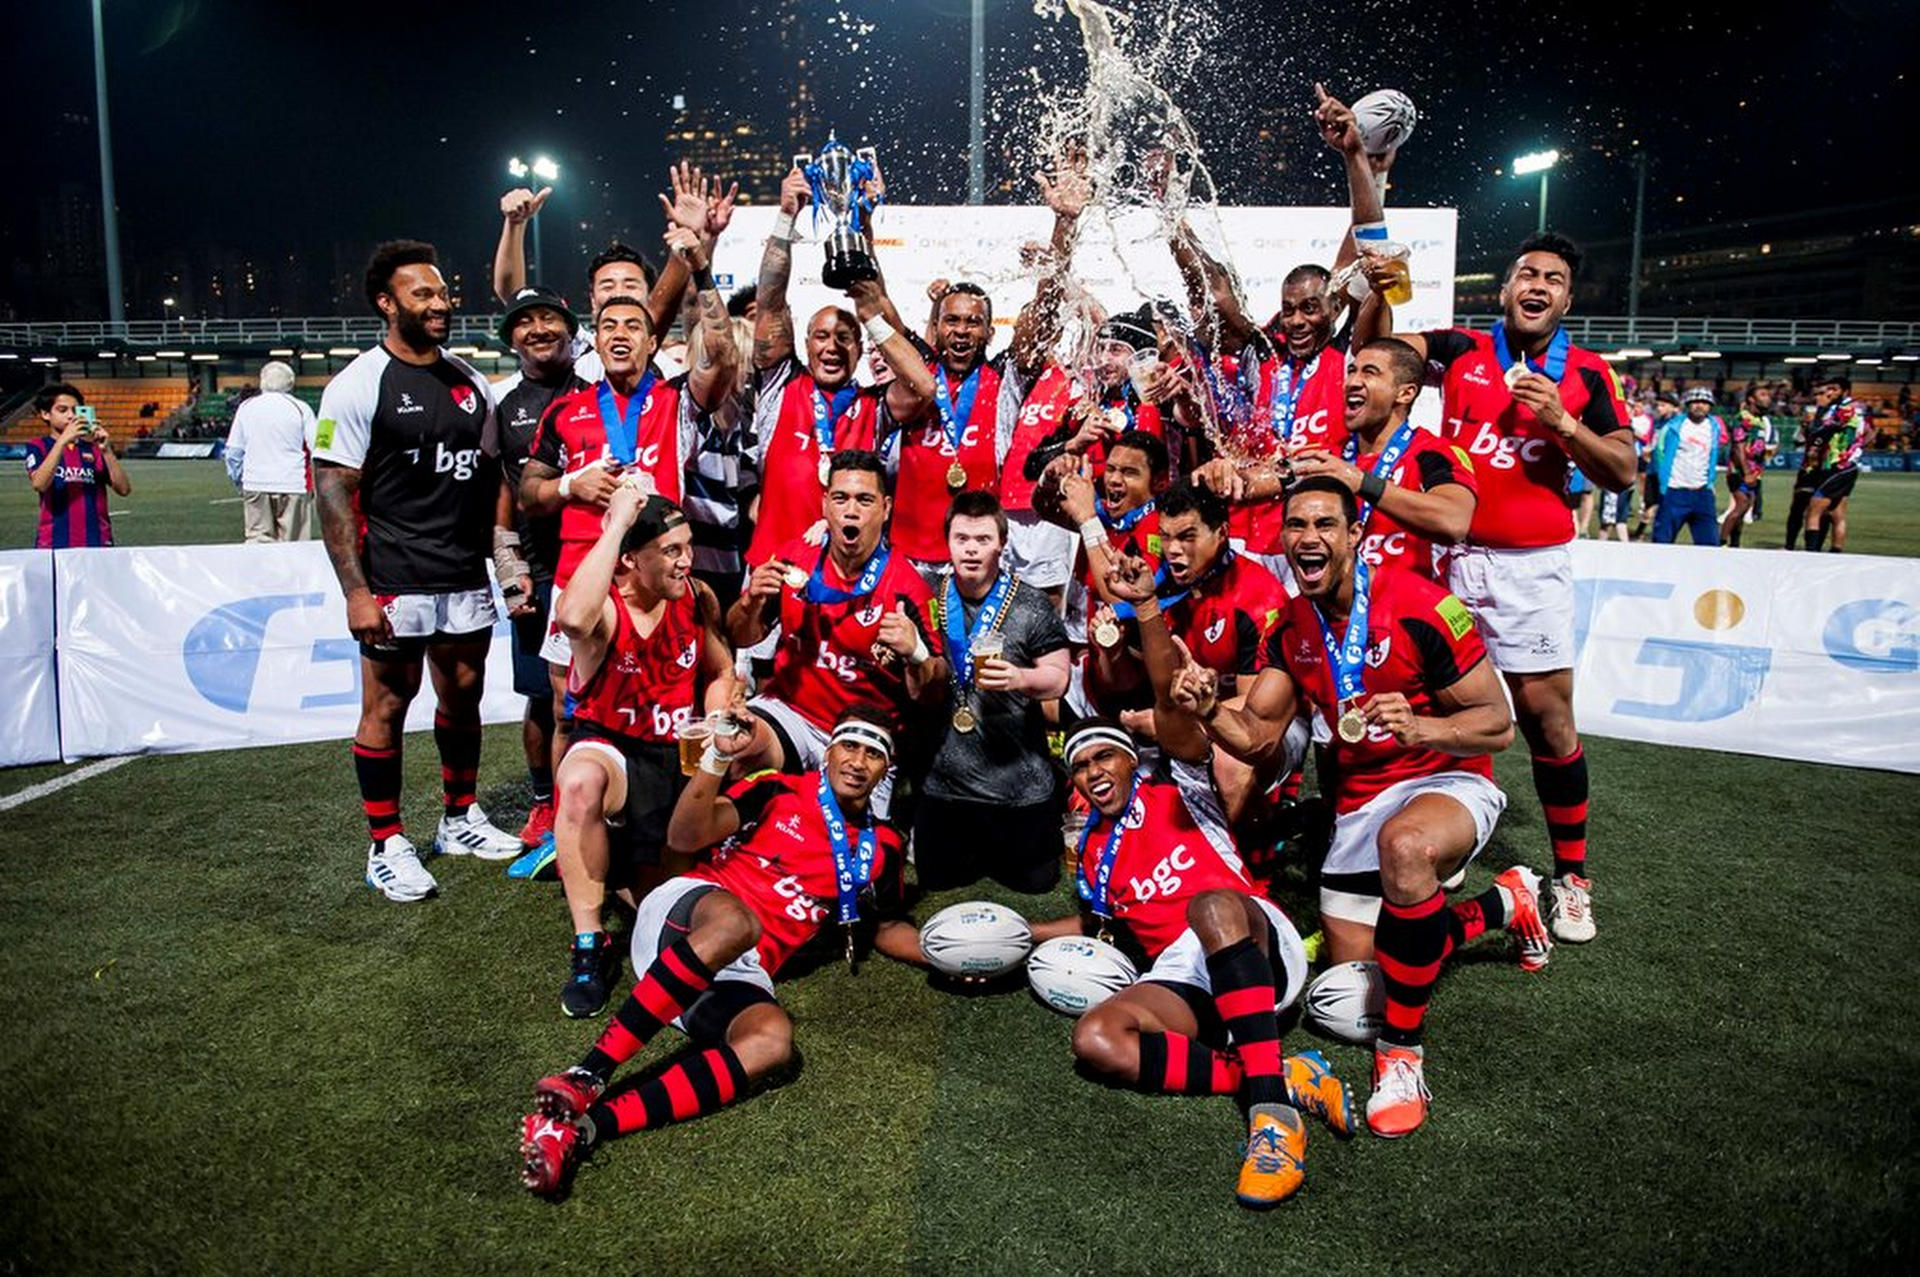 The BGC Asia-Pacific Dragons celebrate their victory in the Cup final at the GFI HKFC Tens on Thursday night. Photos: SCMP Pictures